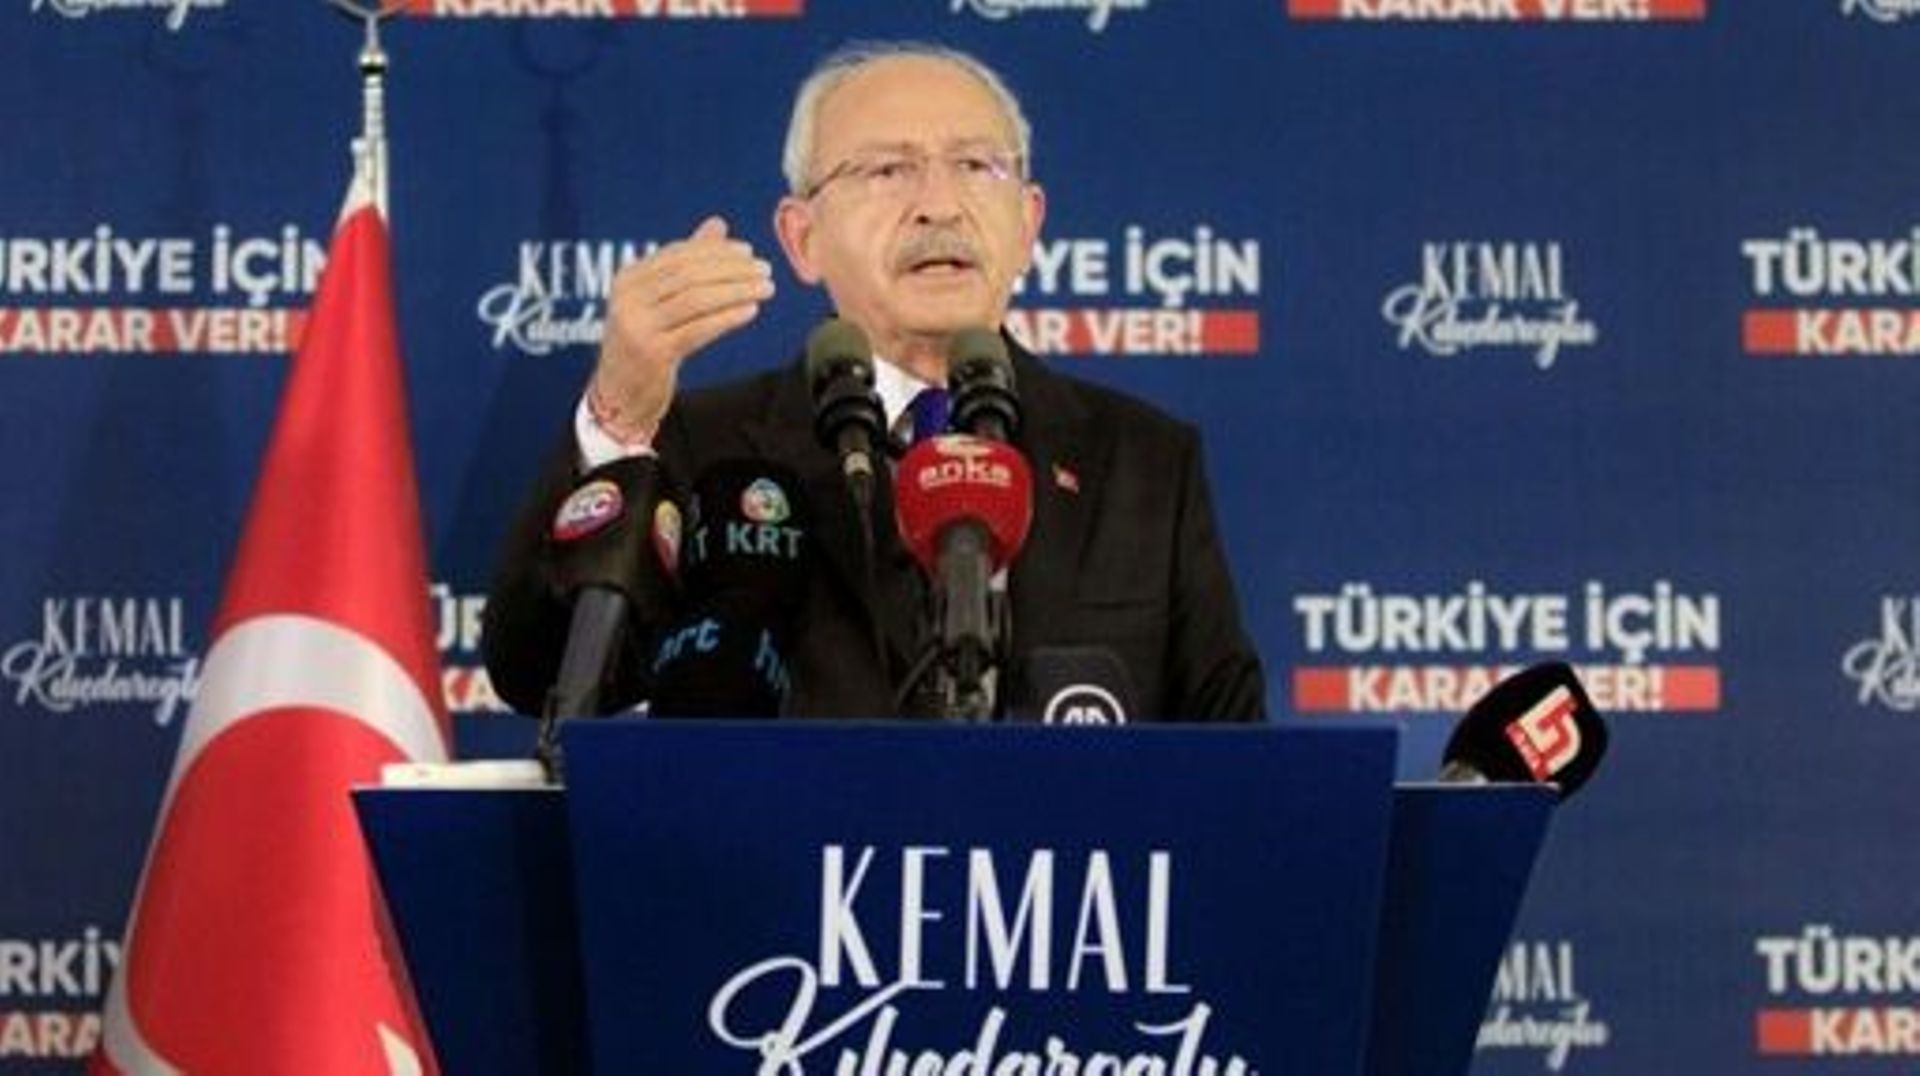 Turkey's Republican People's Party (CHP) Chairman and Presidential candidate Kemal Kilicdaroglu gives a speech in a tent during a campaign rally in Antakya, Turkey, on May 23, 2023, ahead of the May 28 presidential runoff vote.  Can EROK / AFP